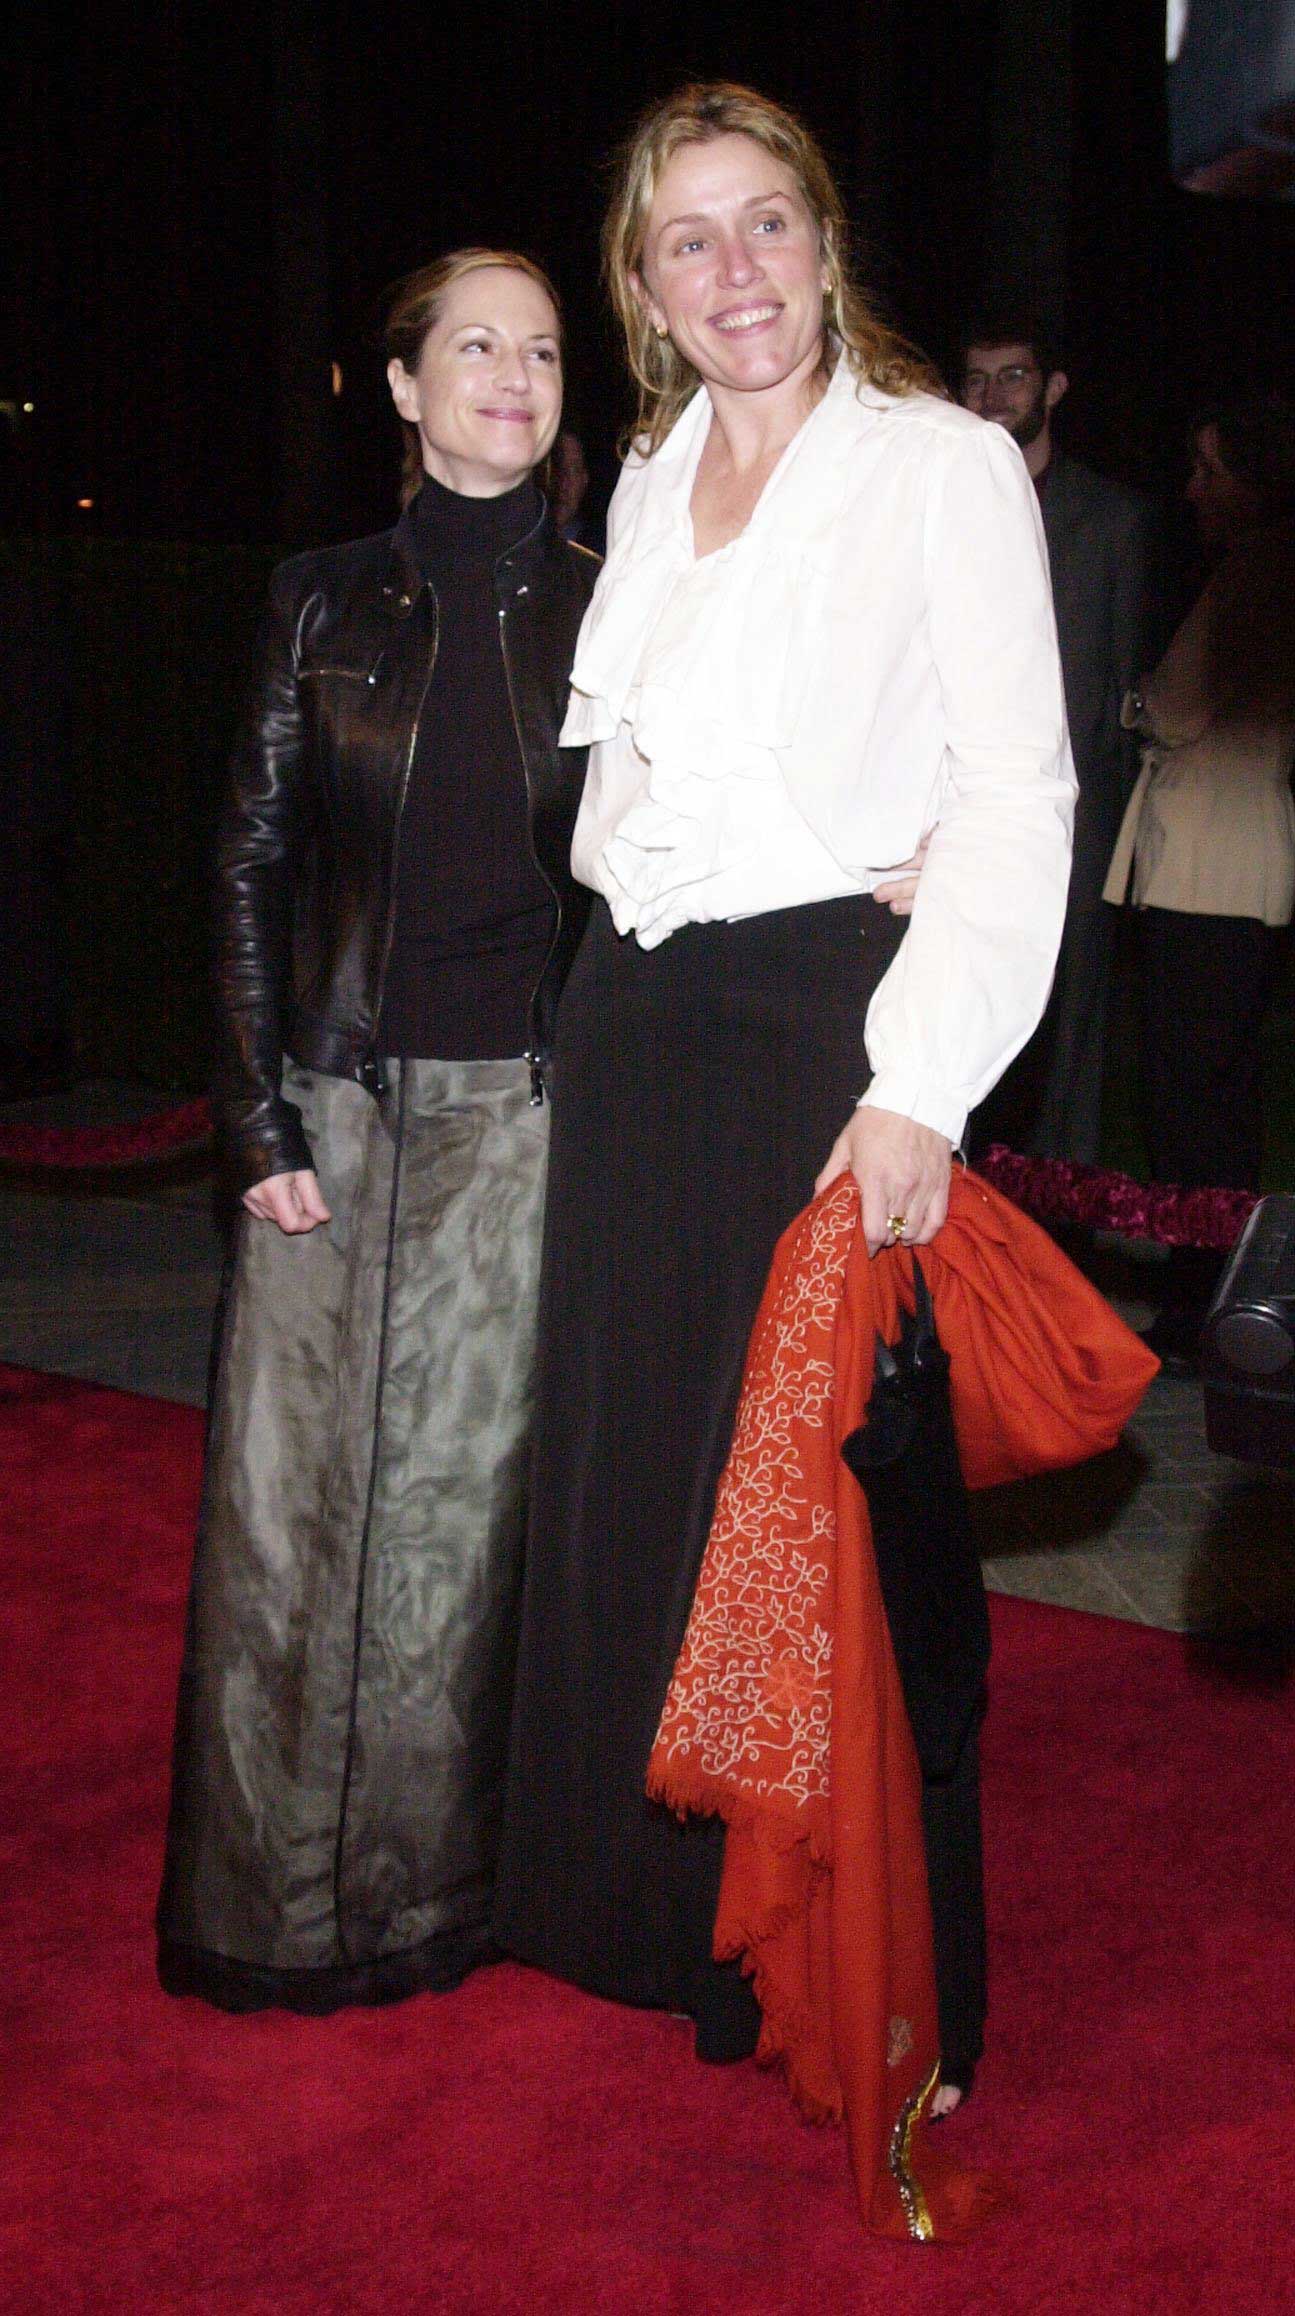 LOS ANGELES, UNITED STATES: Frances McDormand(R), who stars in the motion picture "Wonder Boys," poses with actress Holly Hunter(L) 22 February 2000 at the Los Angeles premiere of the motion picture, to benefit The Ploughshares Fund. The Ploughshares Fund is an organization dedicated to stopping the spread of weapons of war, from nuclear weapons to land mines. (ELECTRONIC IMAGE) AFP PHOTO Jim RUYMEN/jr (Photo credit should read JIM RUYMEN/AFP/Getty Images)